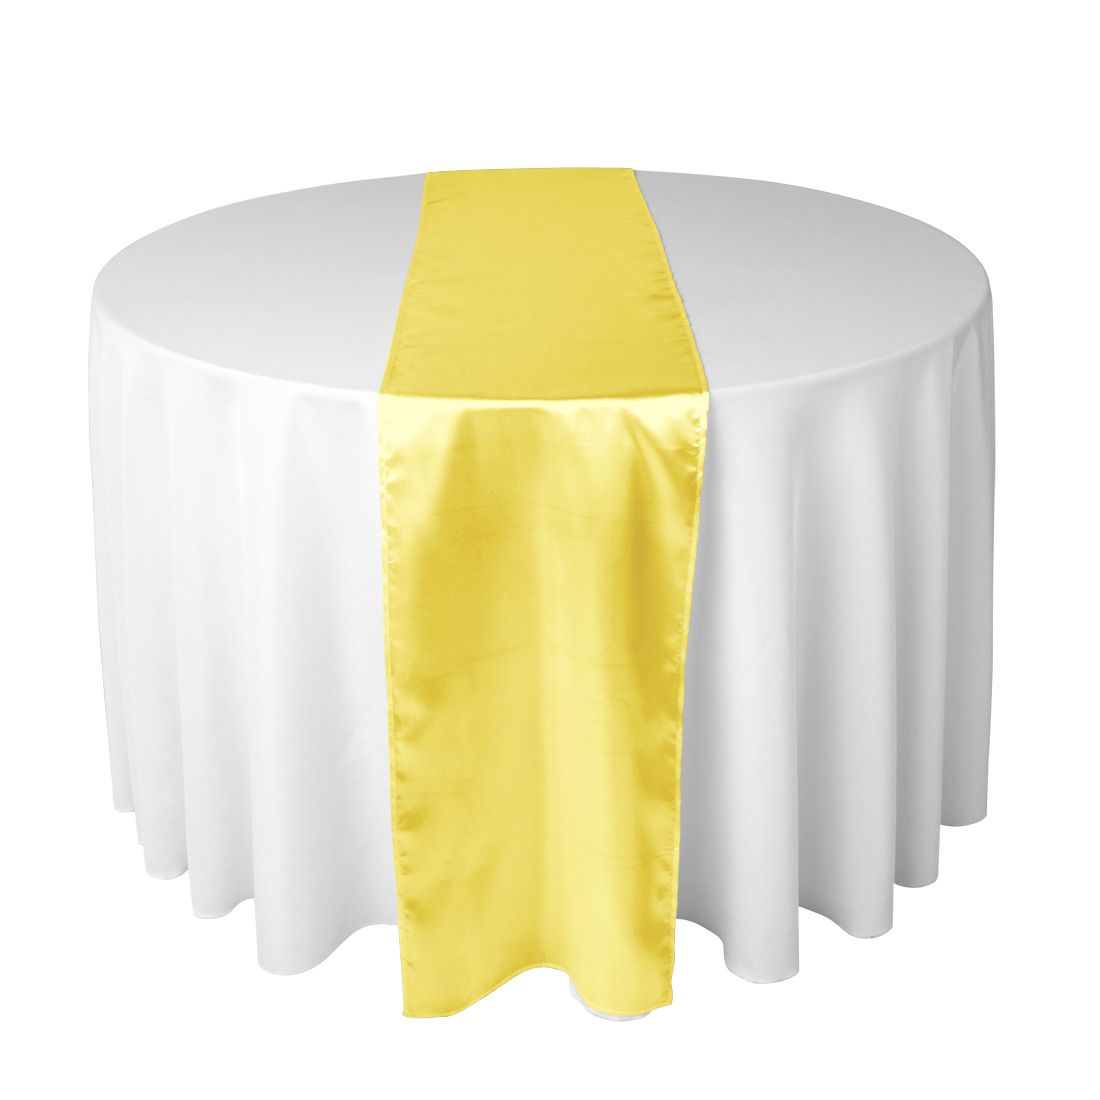 14 x 108 in Satin Table Runner for Wedding Reception or Shower